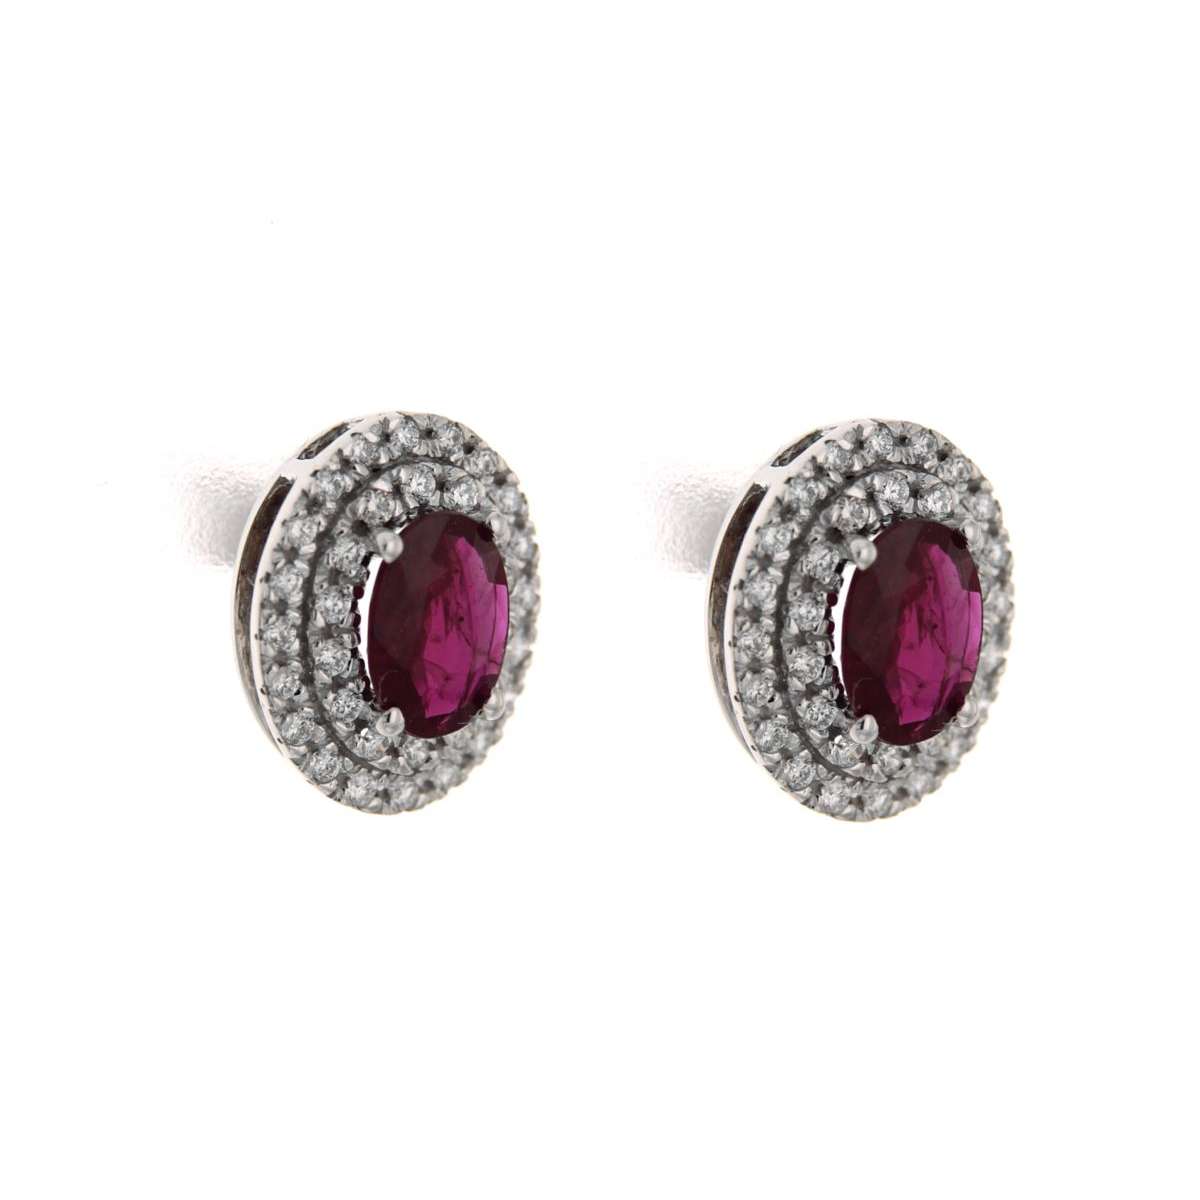 Earrings with 1.44 carat red rubies and 0.40 carat diamonds g-vs1